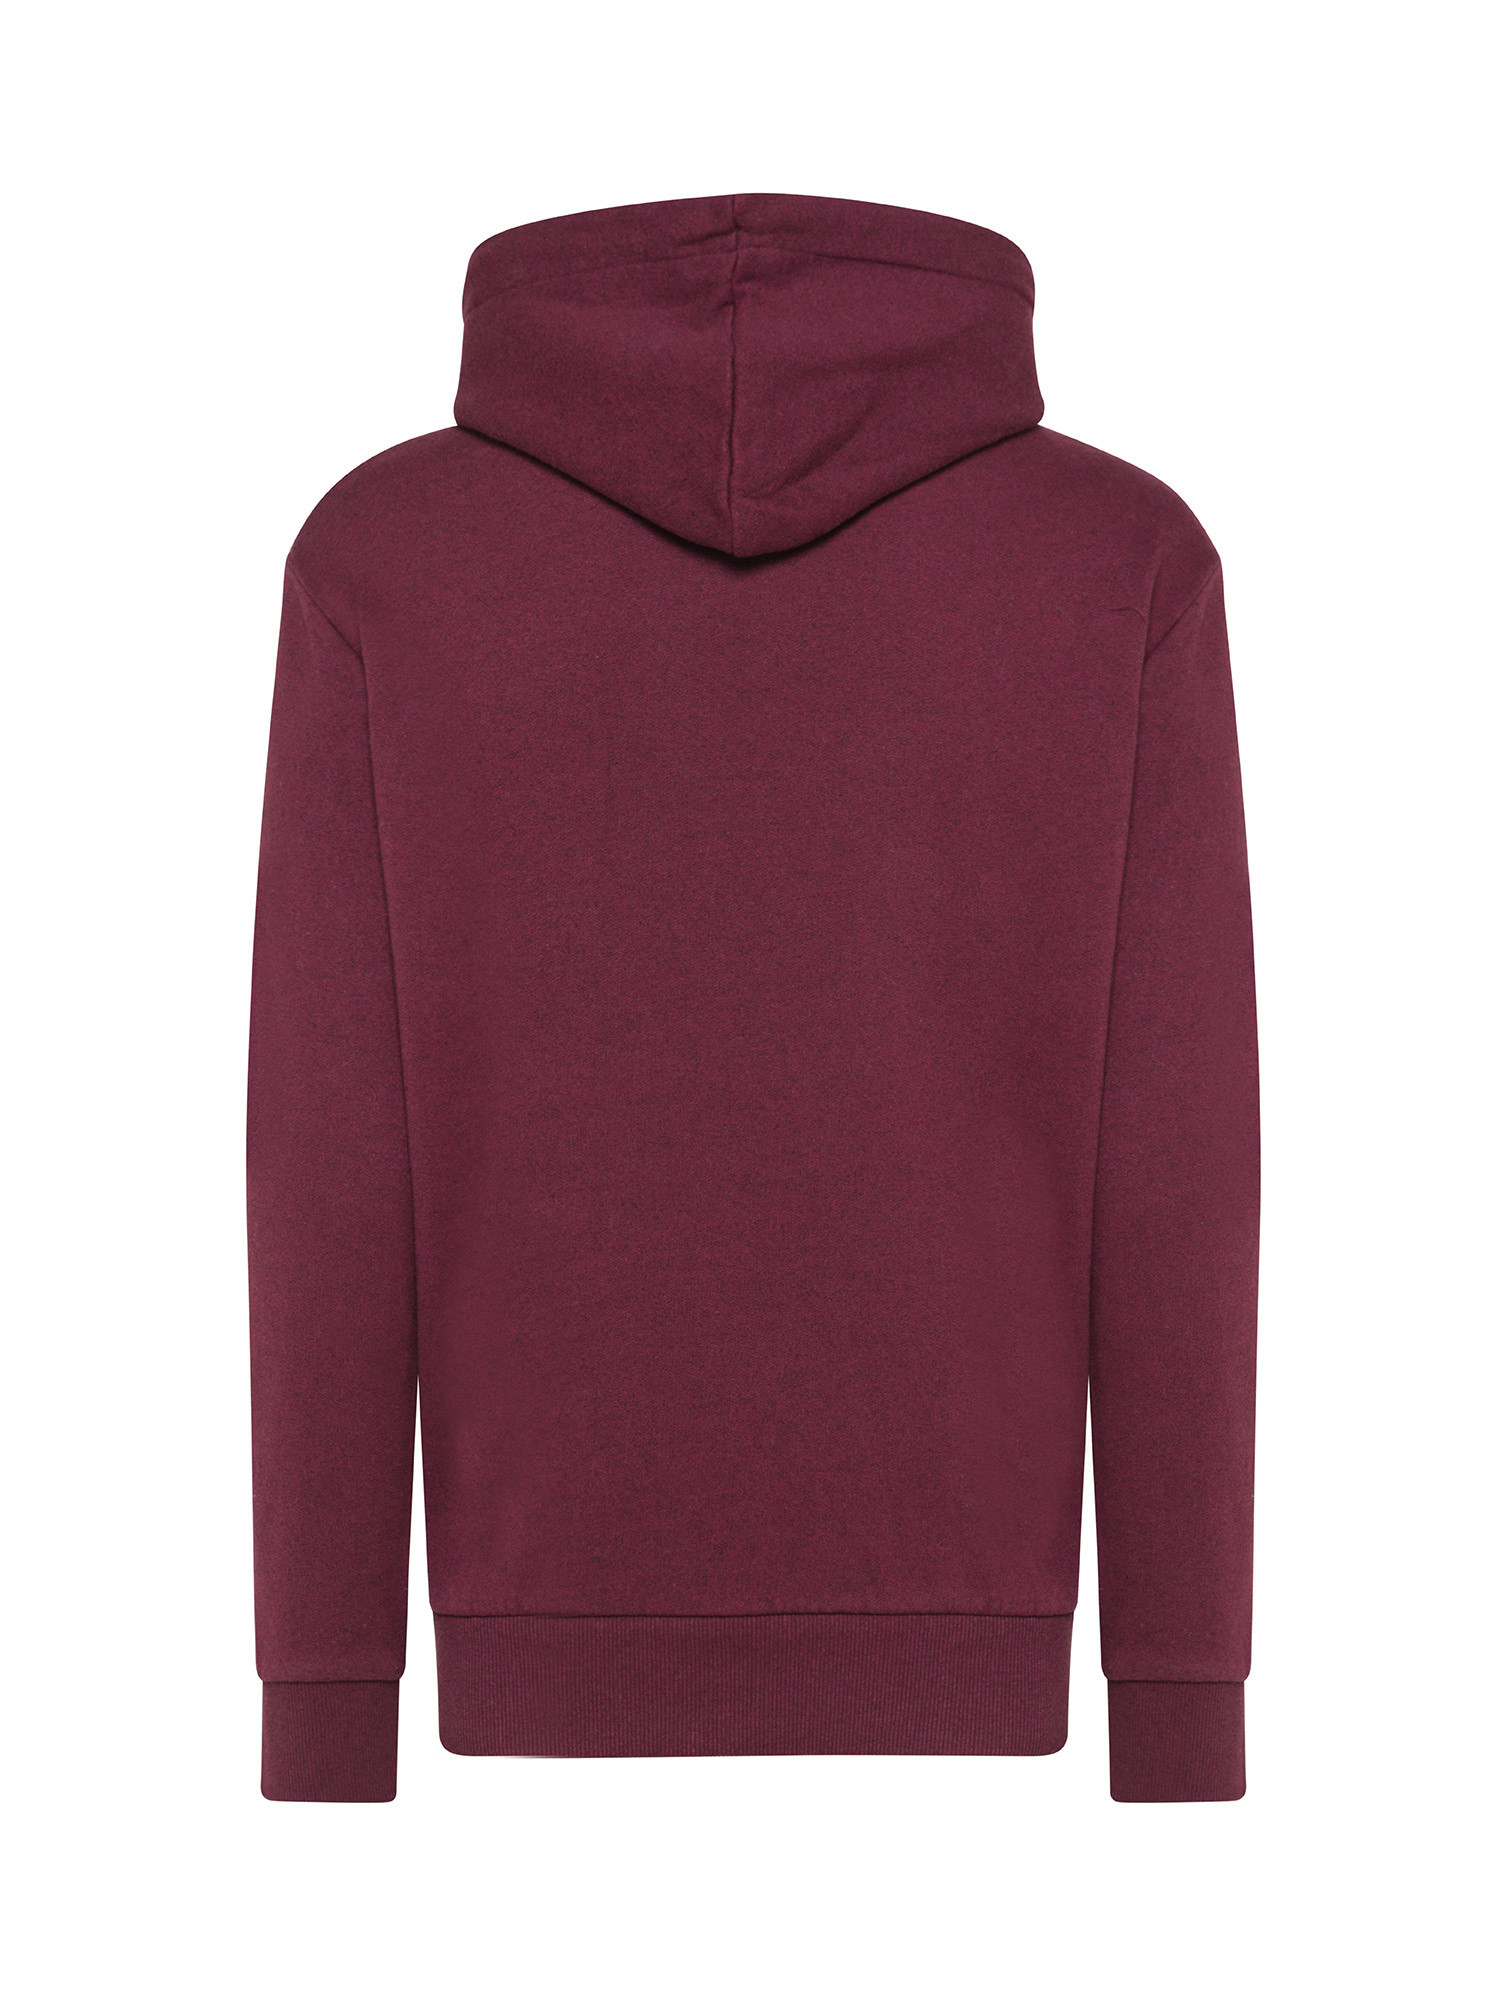 Superdry - Hooded sweatshirt with logo, Red Bordeaux, large image number 1